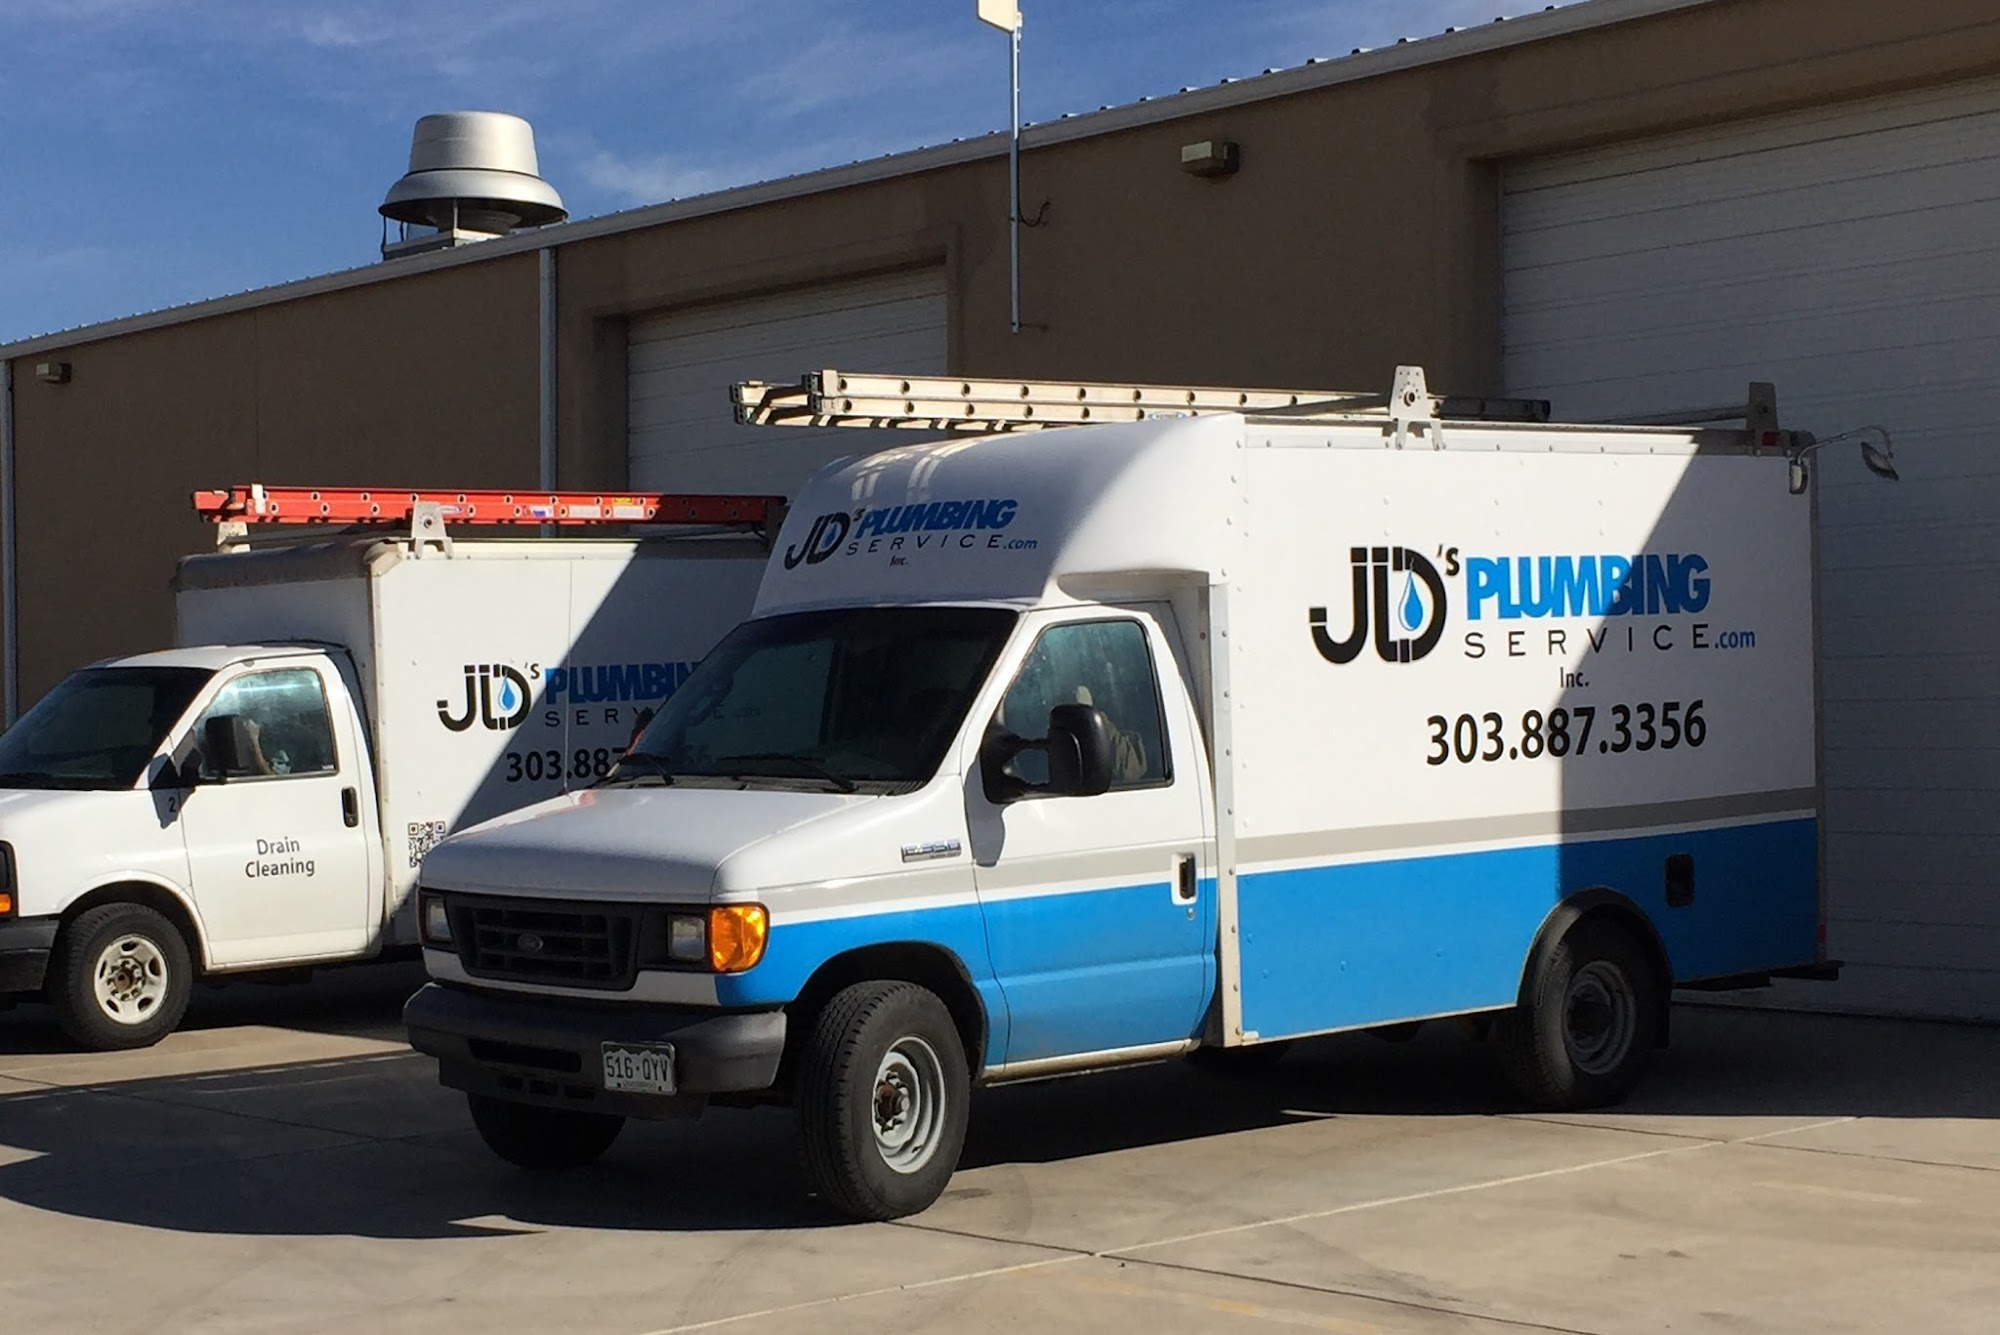 JD's Denver Plumbing, Heating and Air Conditioning 2727 W 92nd Ave Ste 100C, Federal Heights Colorado 80260